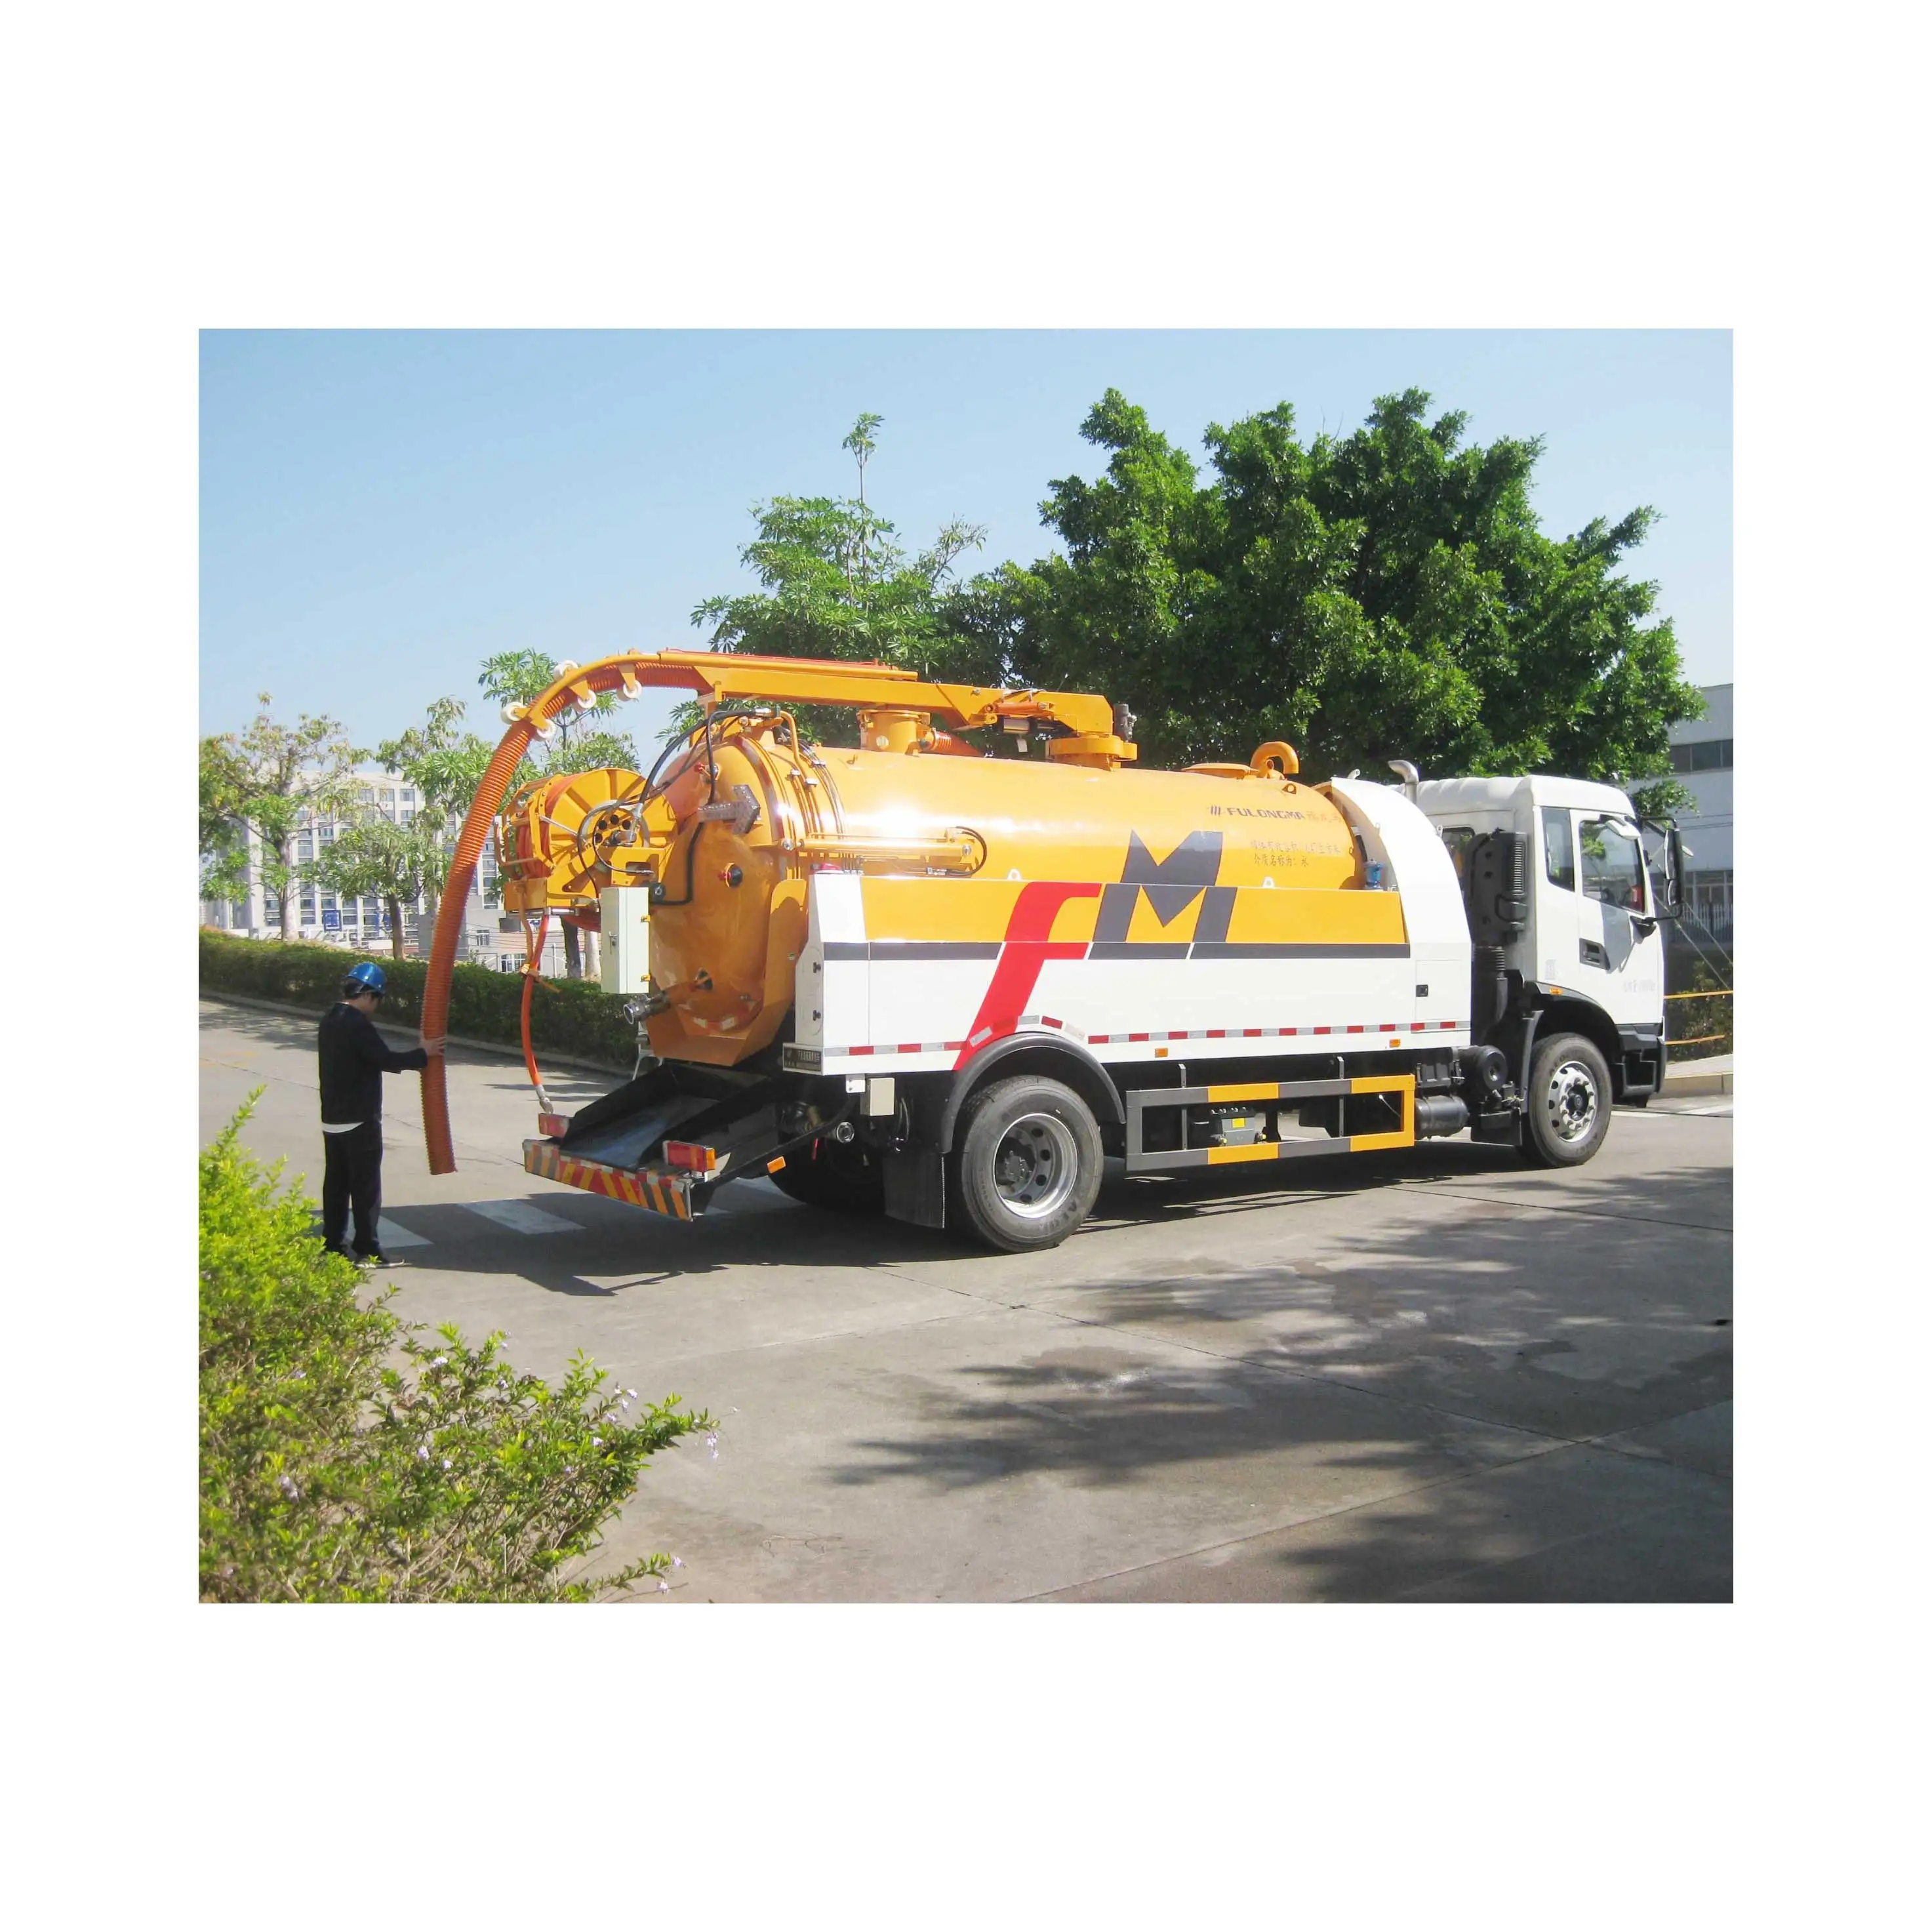 Sewer jetting truck containing high-pressure jetting hose sewage cleaning truck